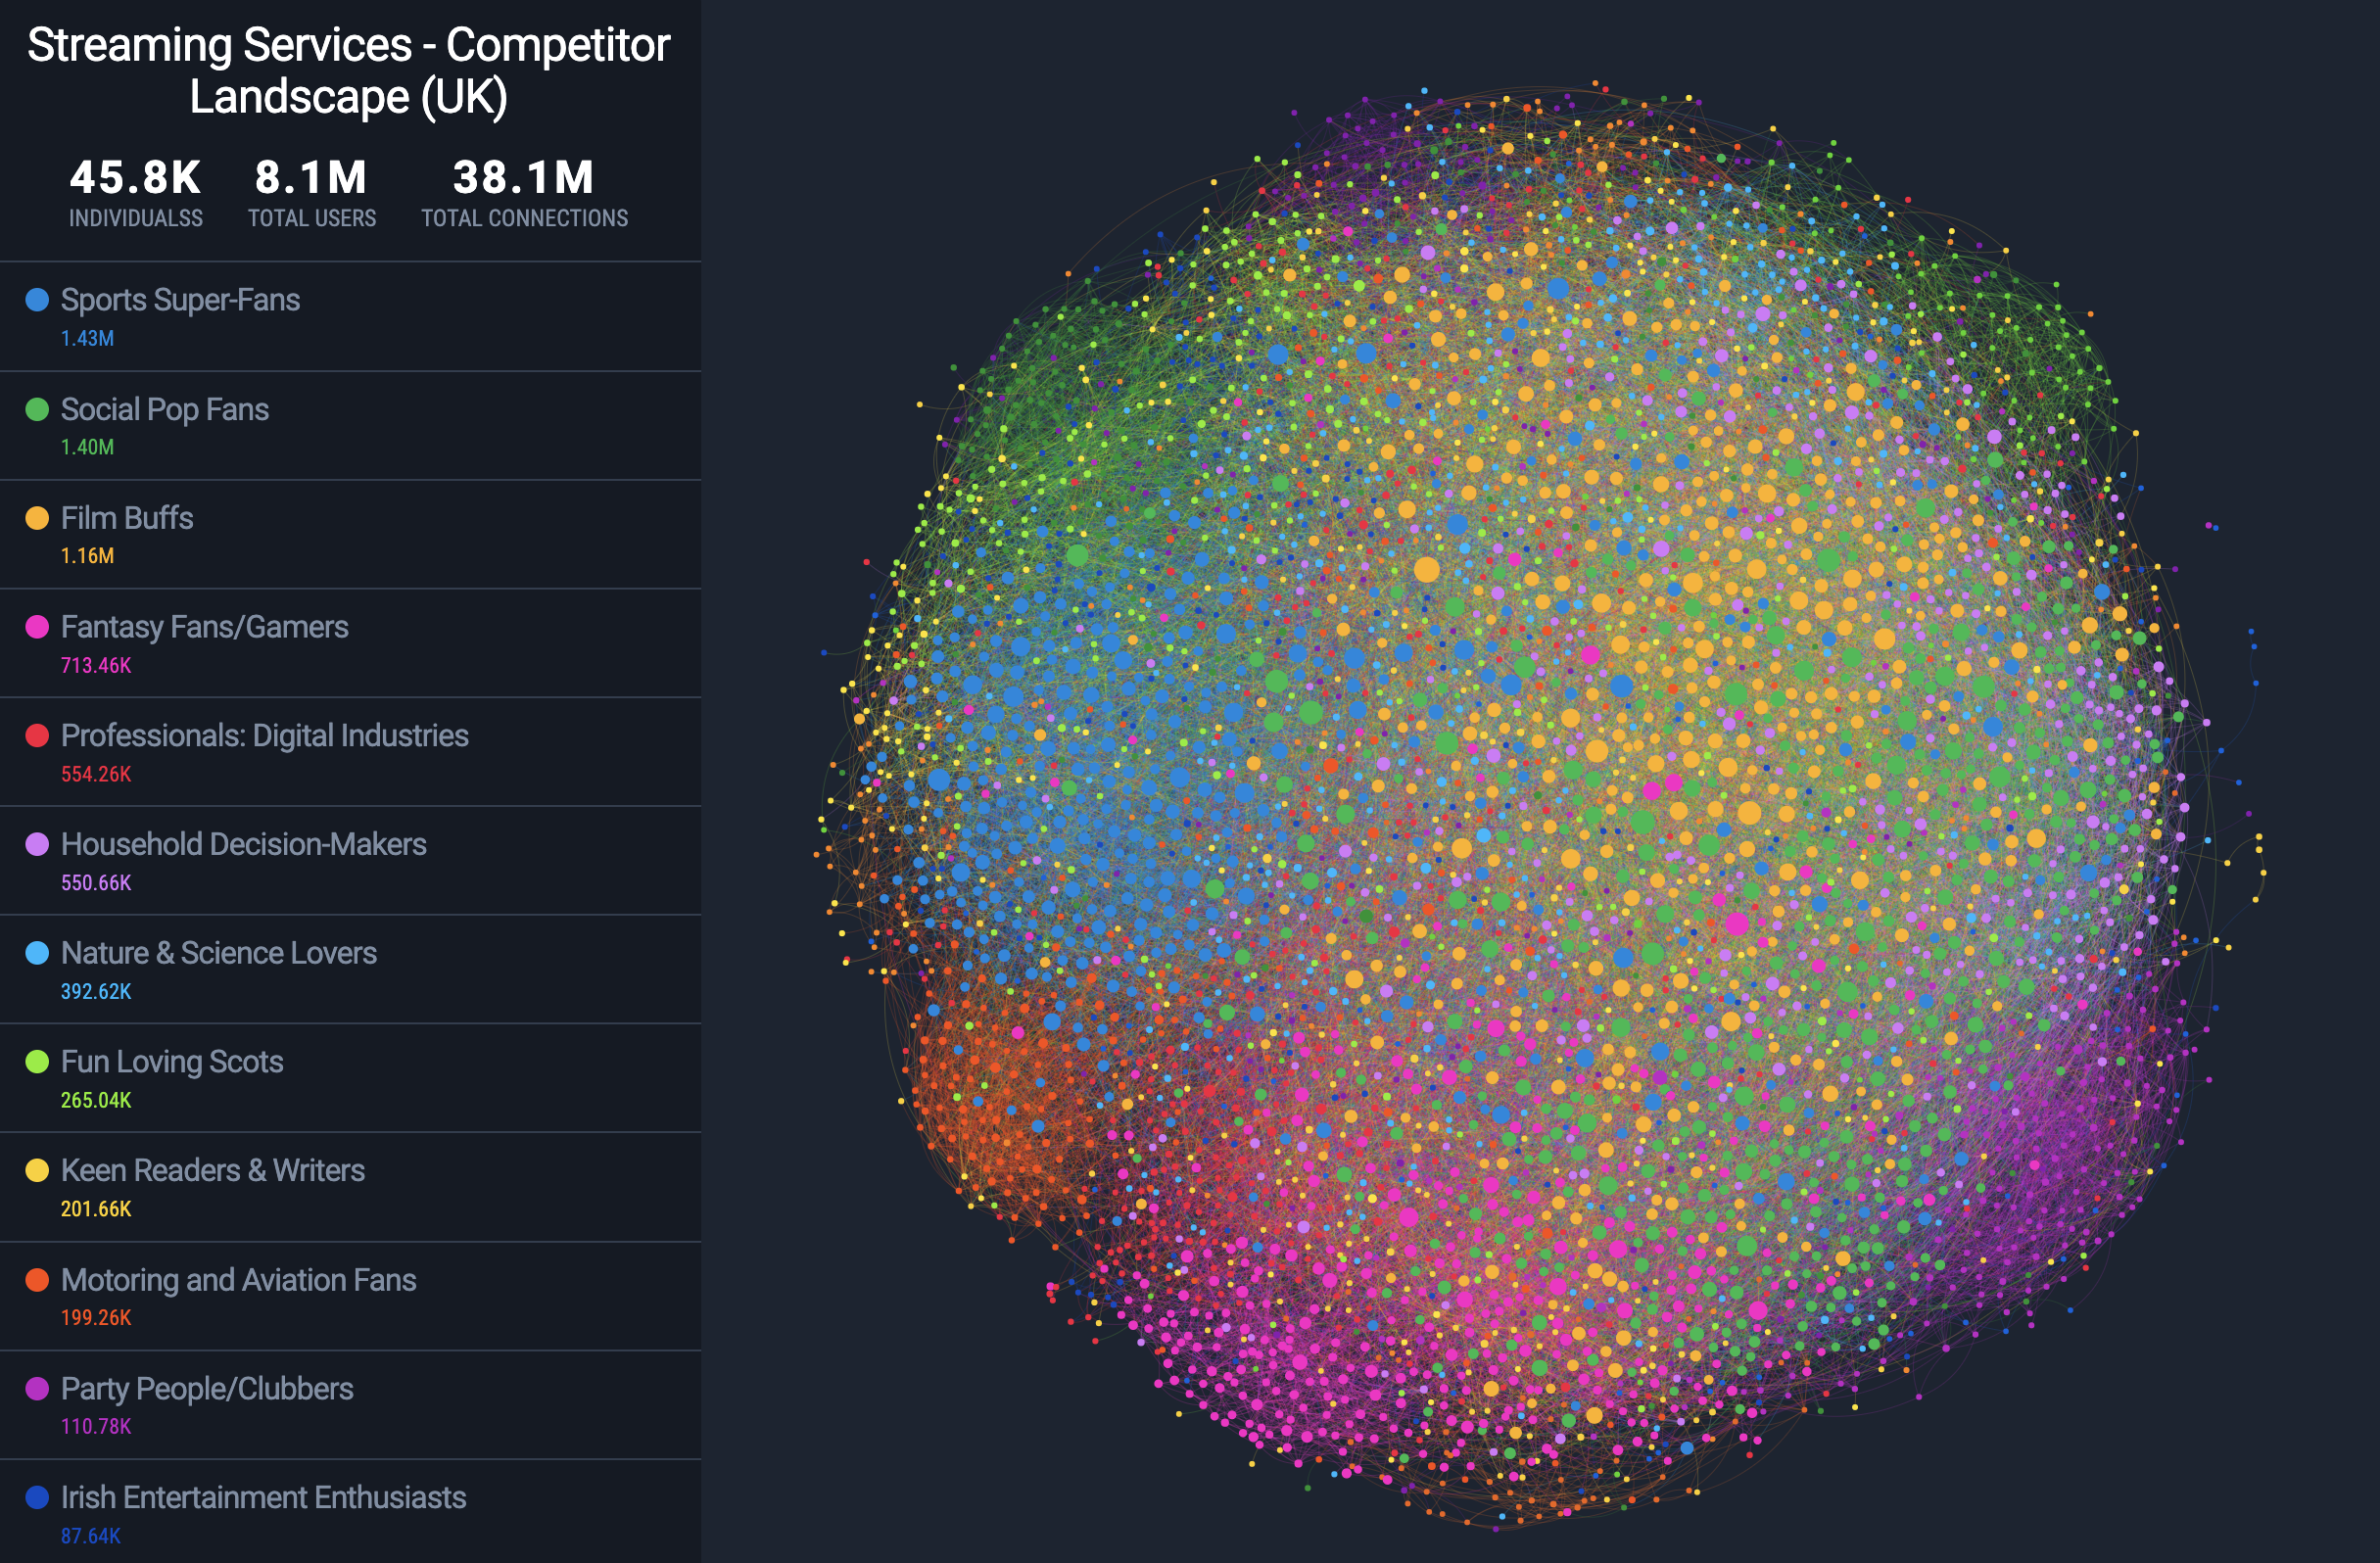 Figure 1: A Fifty ‘network viz’ of the Streaming Services Competitor Landscapes